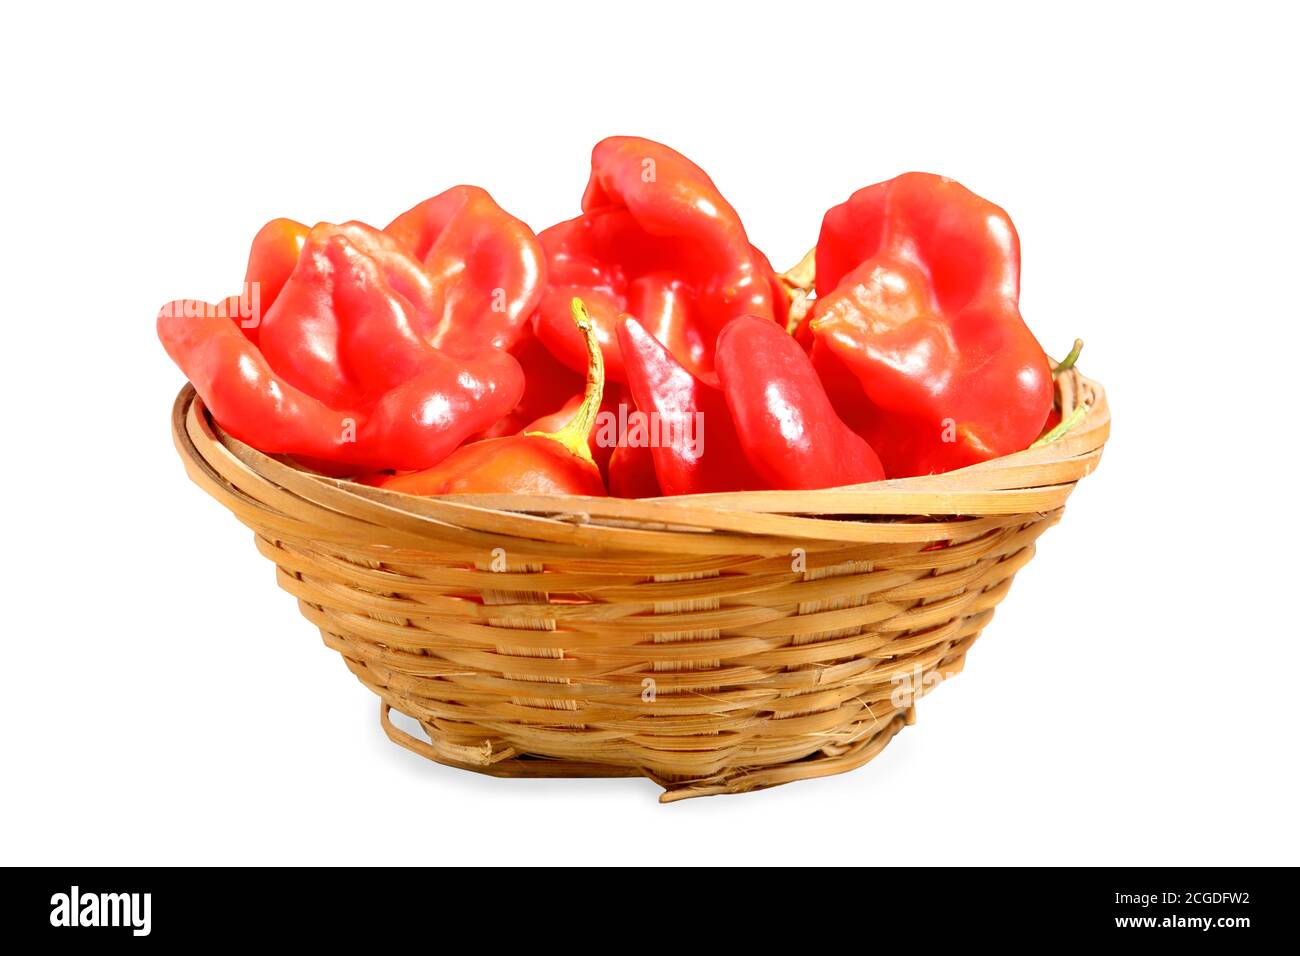 Chili pepper capsicum baccatum isolated on white background Stock Photo